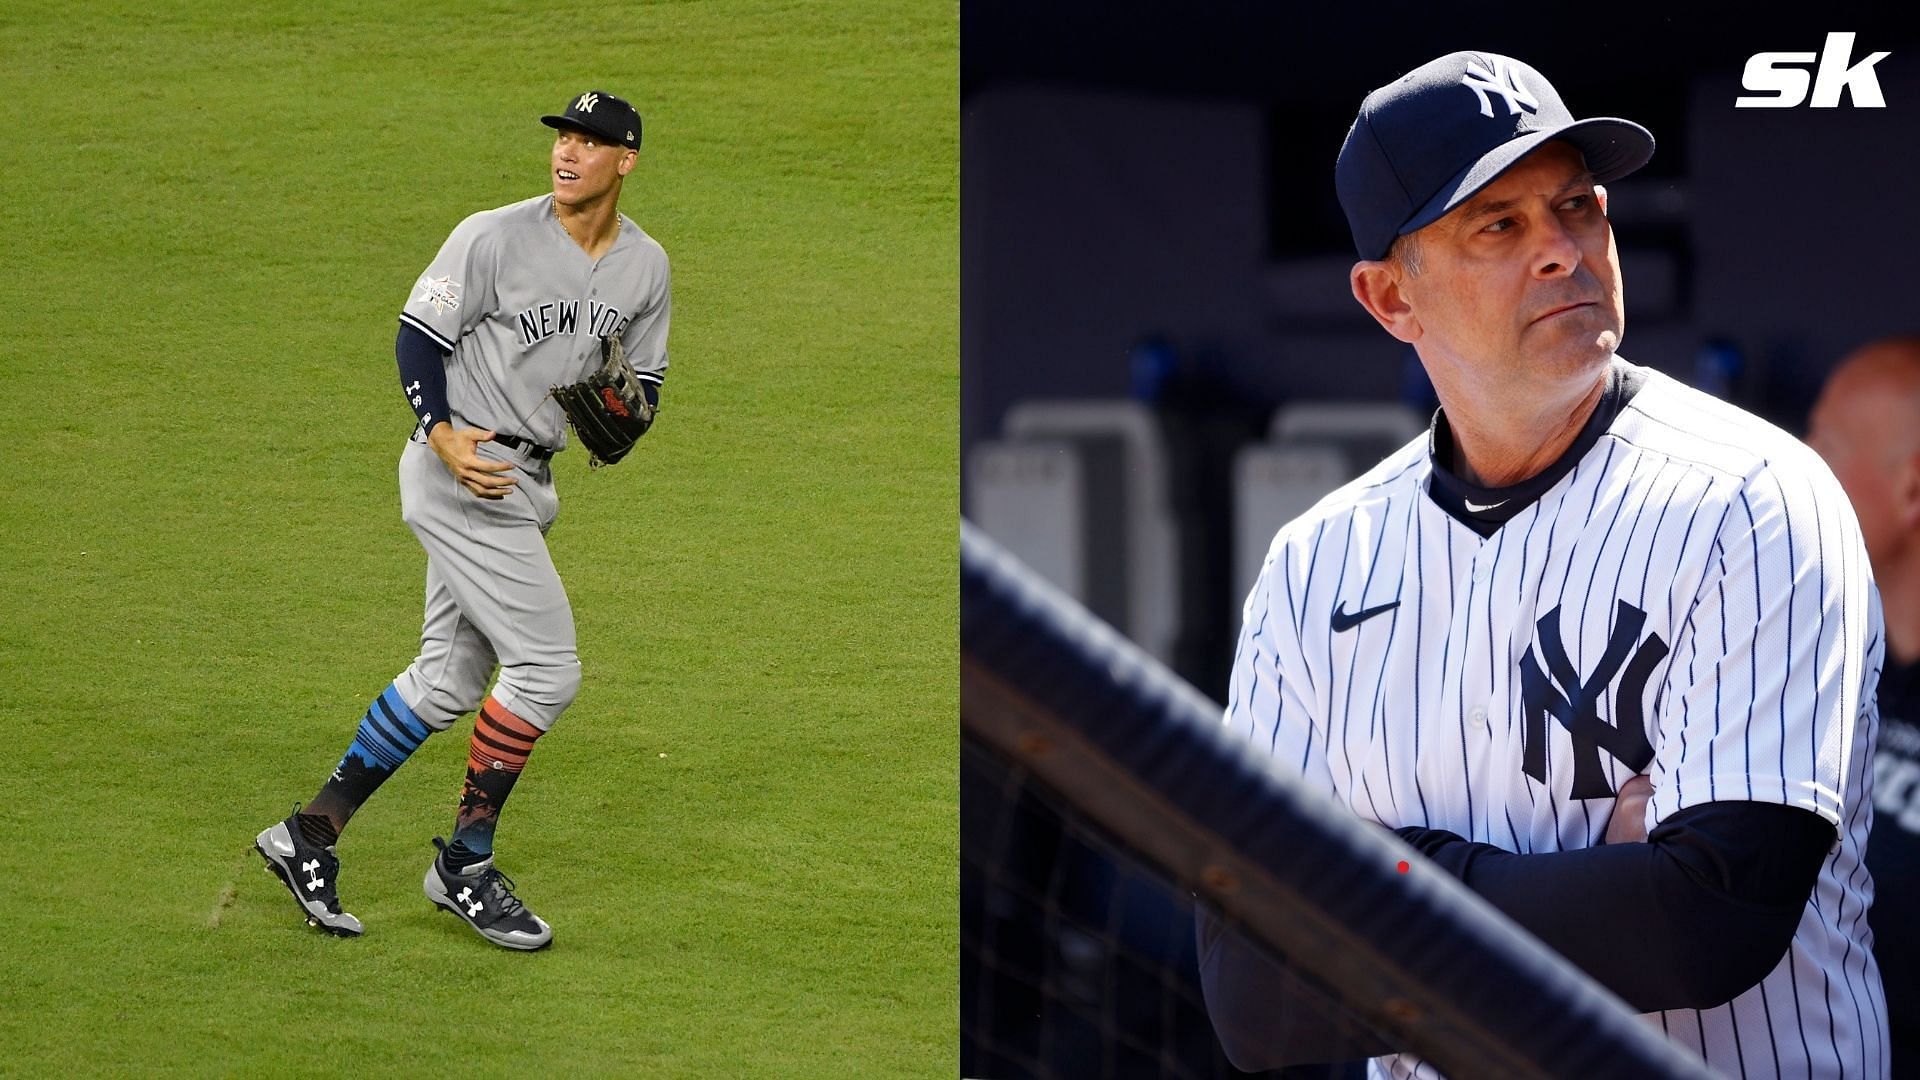 Yankees manager Aaron Boone is not gained any favor with fans by placing Aaron Judge in left field